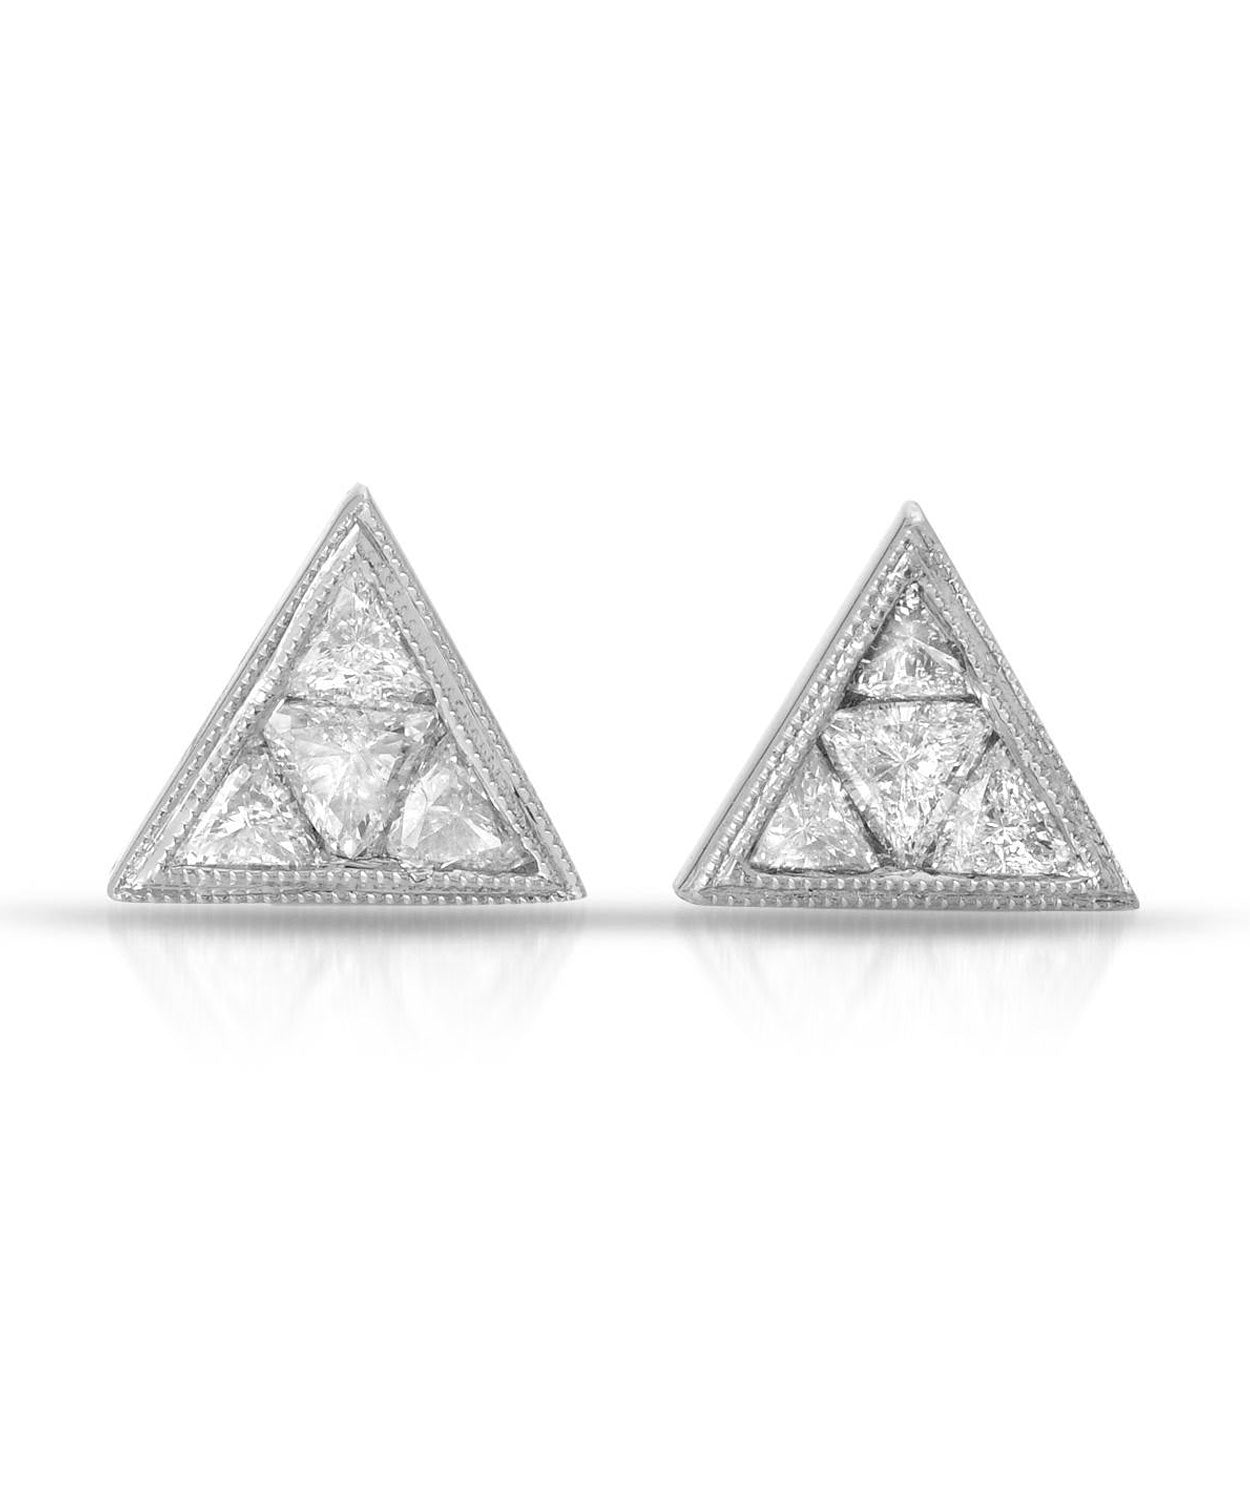 Le Petite Collection 0.36 ctw Diamond 14k White Gold Triangle Stud Earrings View 1